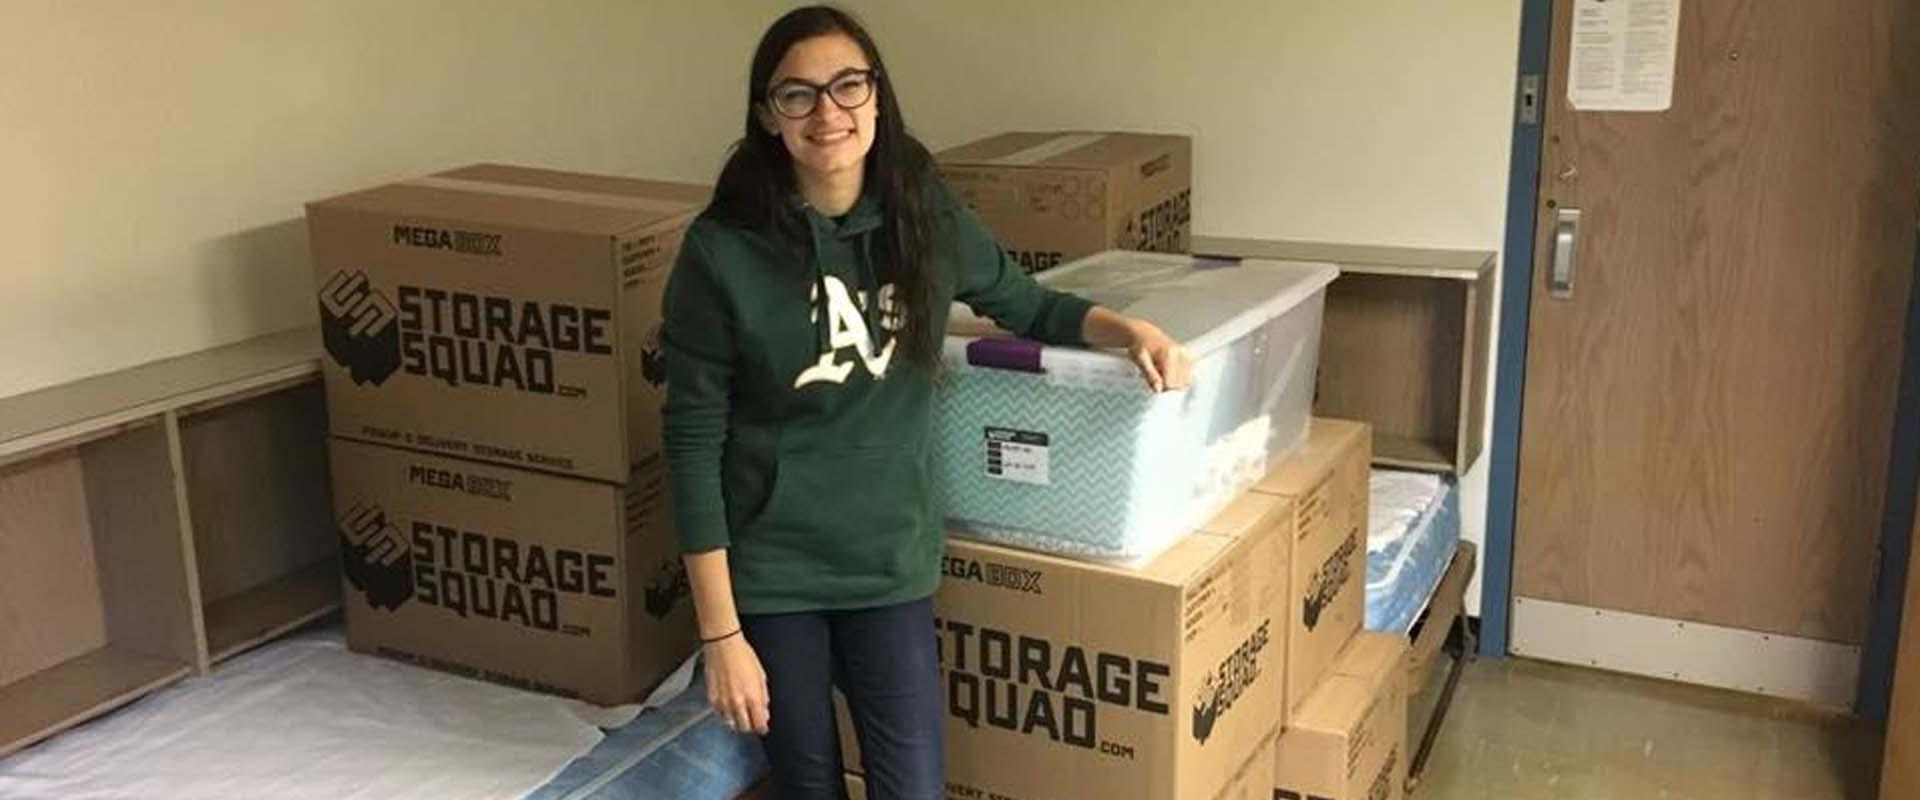 student standing next to her boxed belongings 